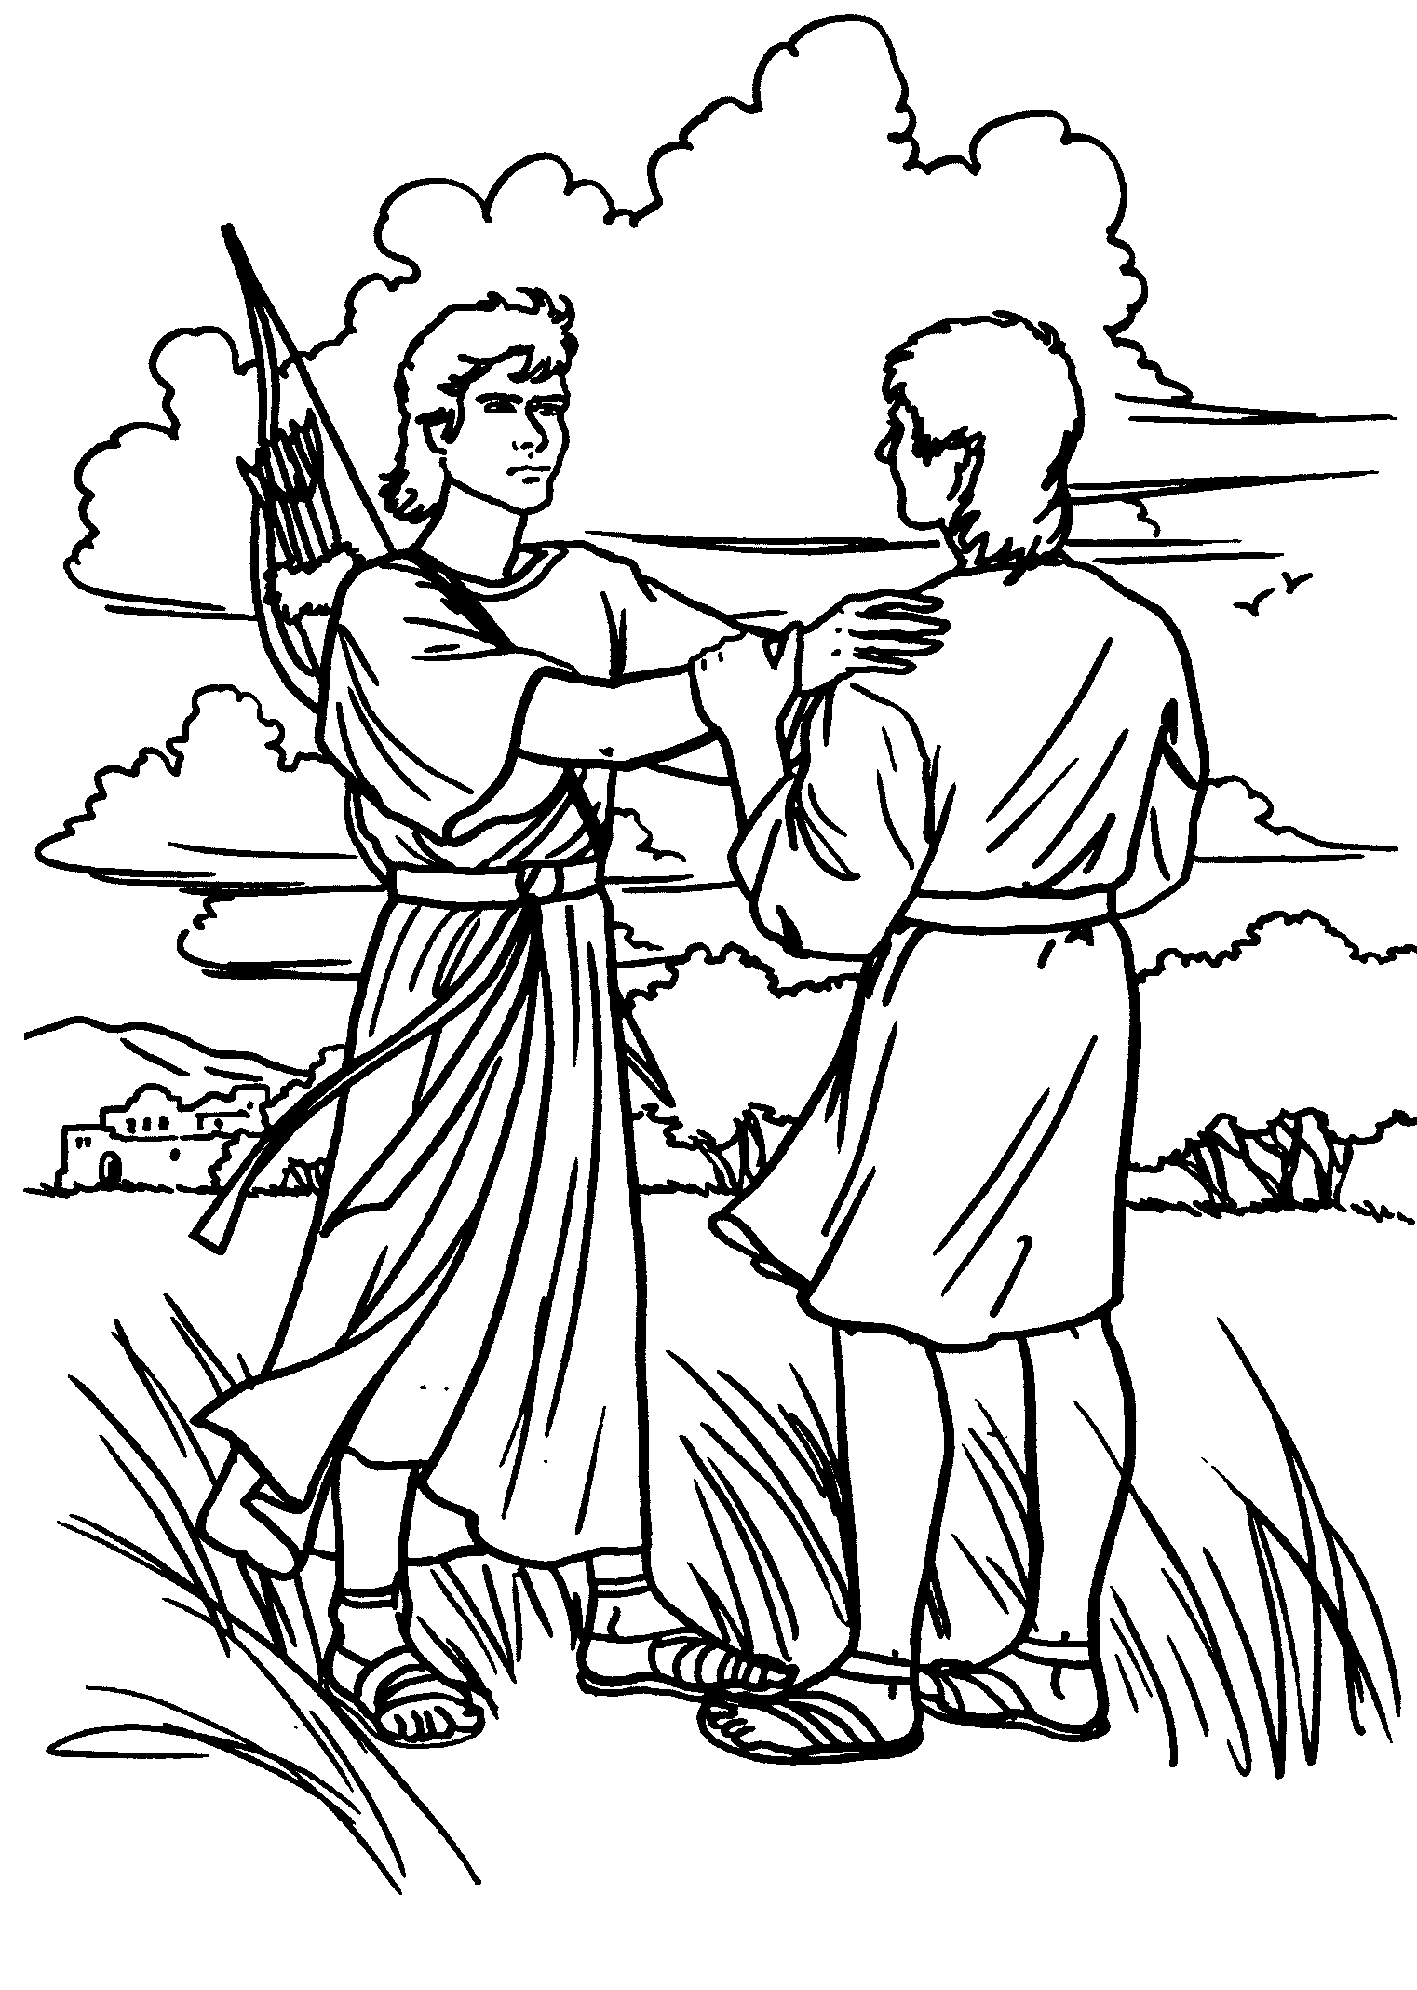 david and jonathan friendship coloring pages